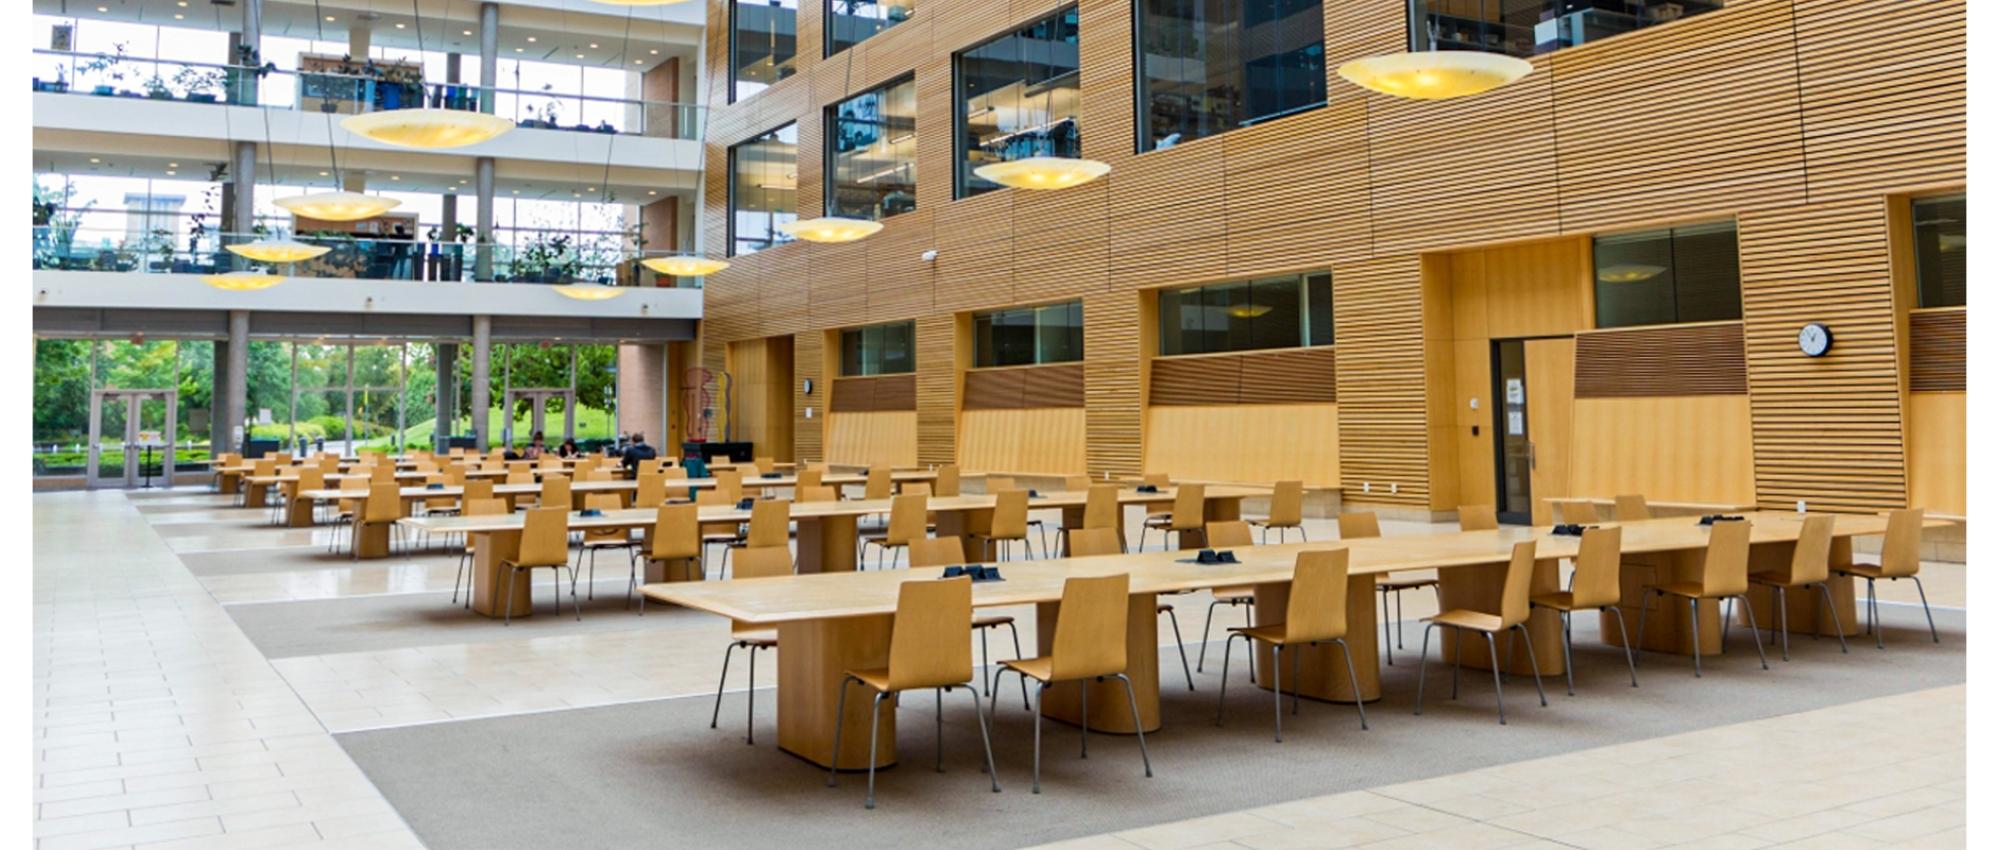 Image of the cafeteria of the Centre for Blood Research buidling